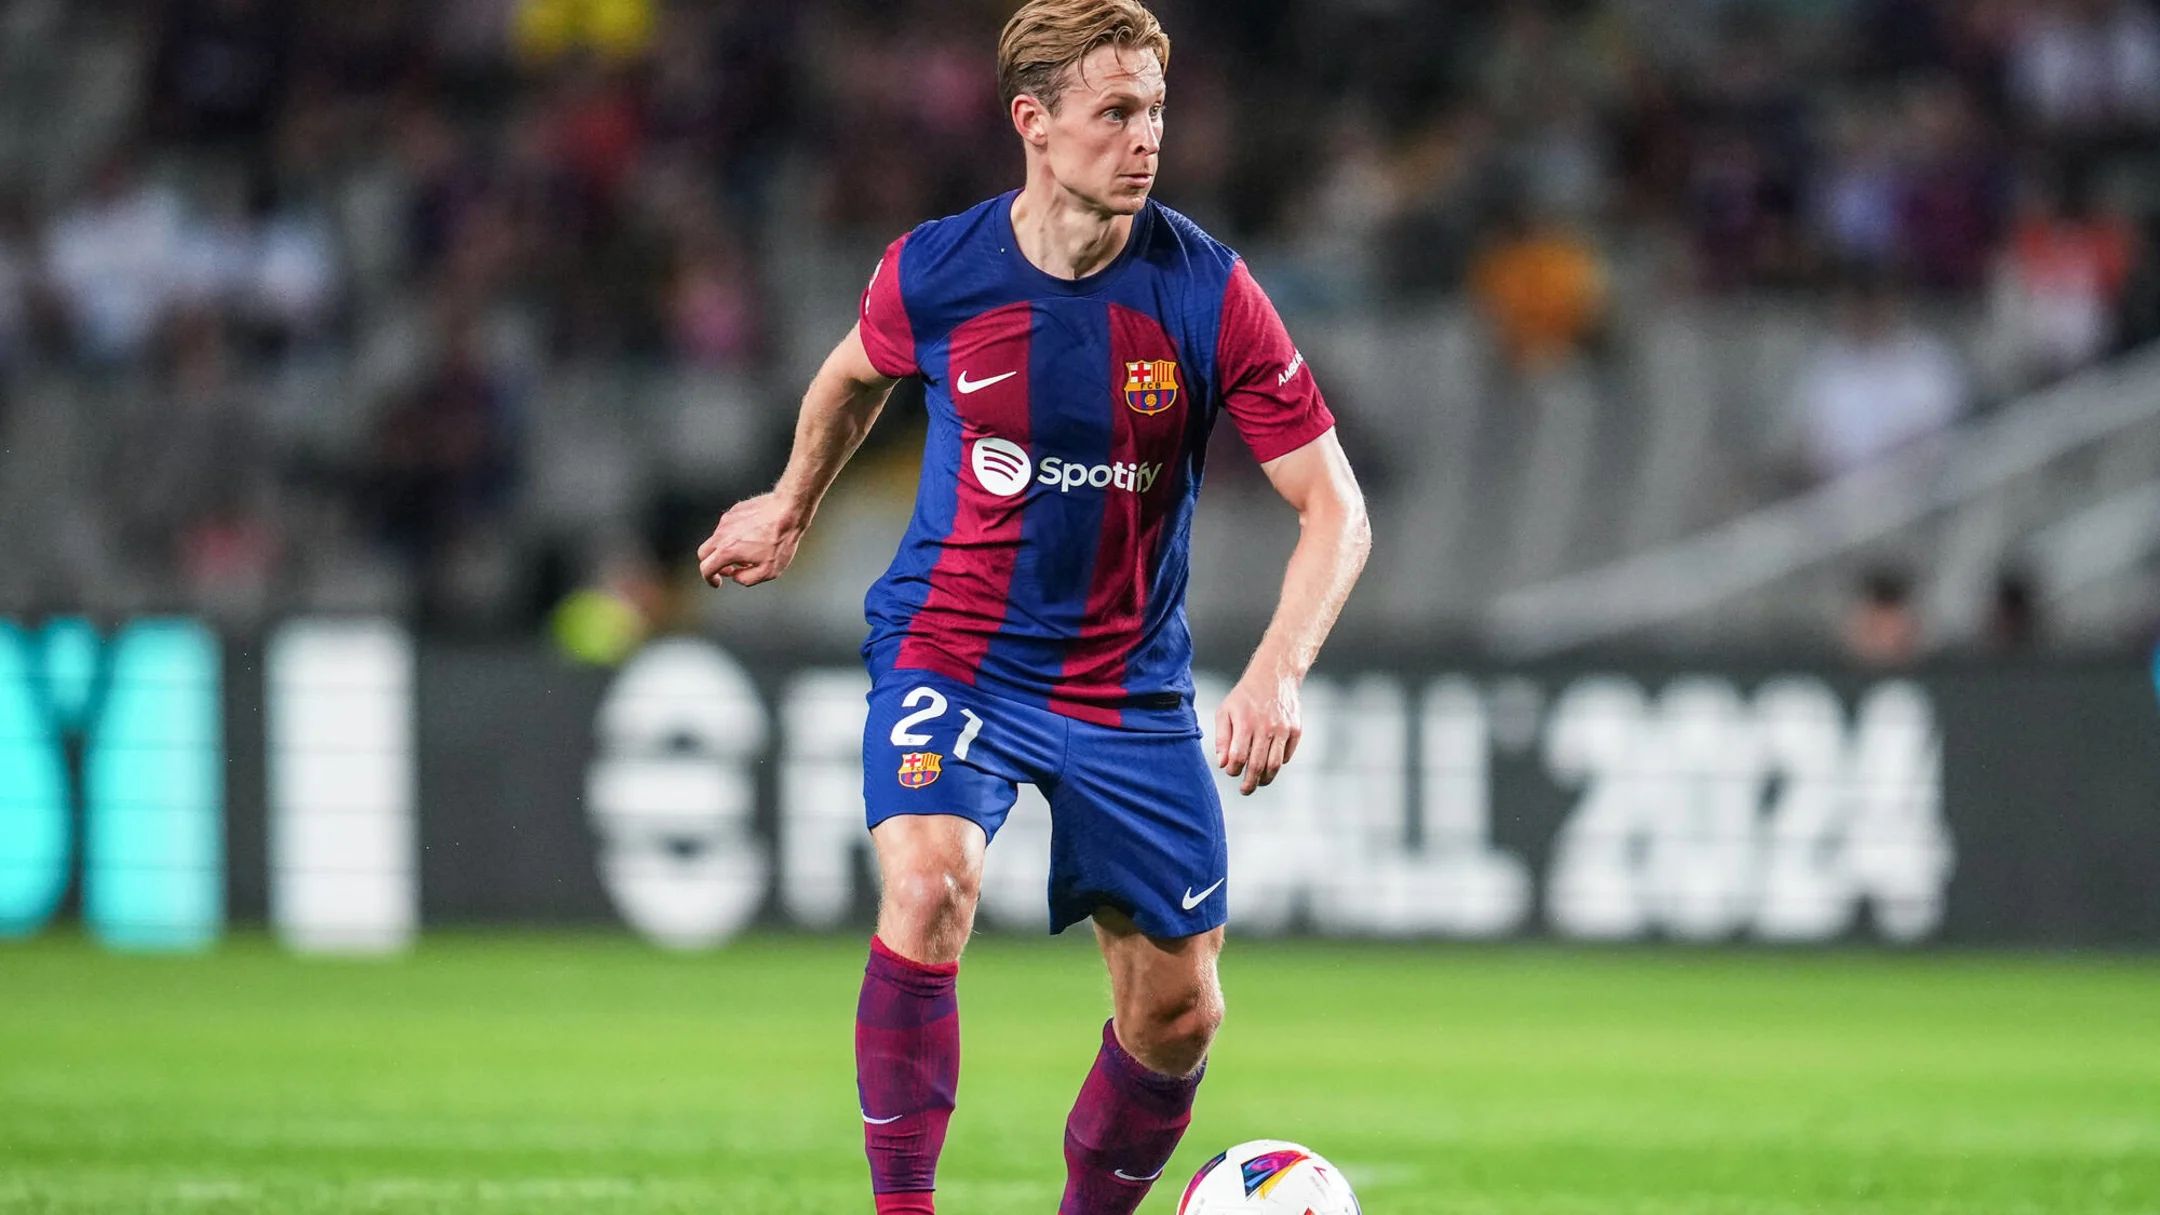 Barcelona dealt with blow in bid to raise transfer funds as German giant has doubts